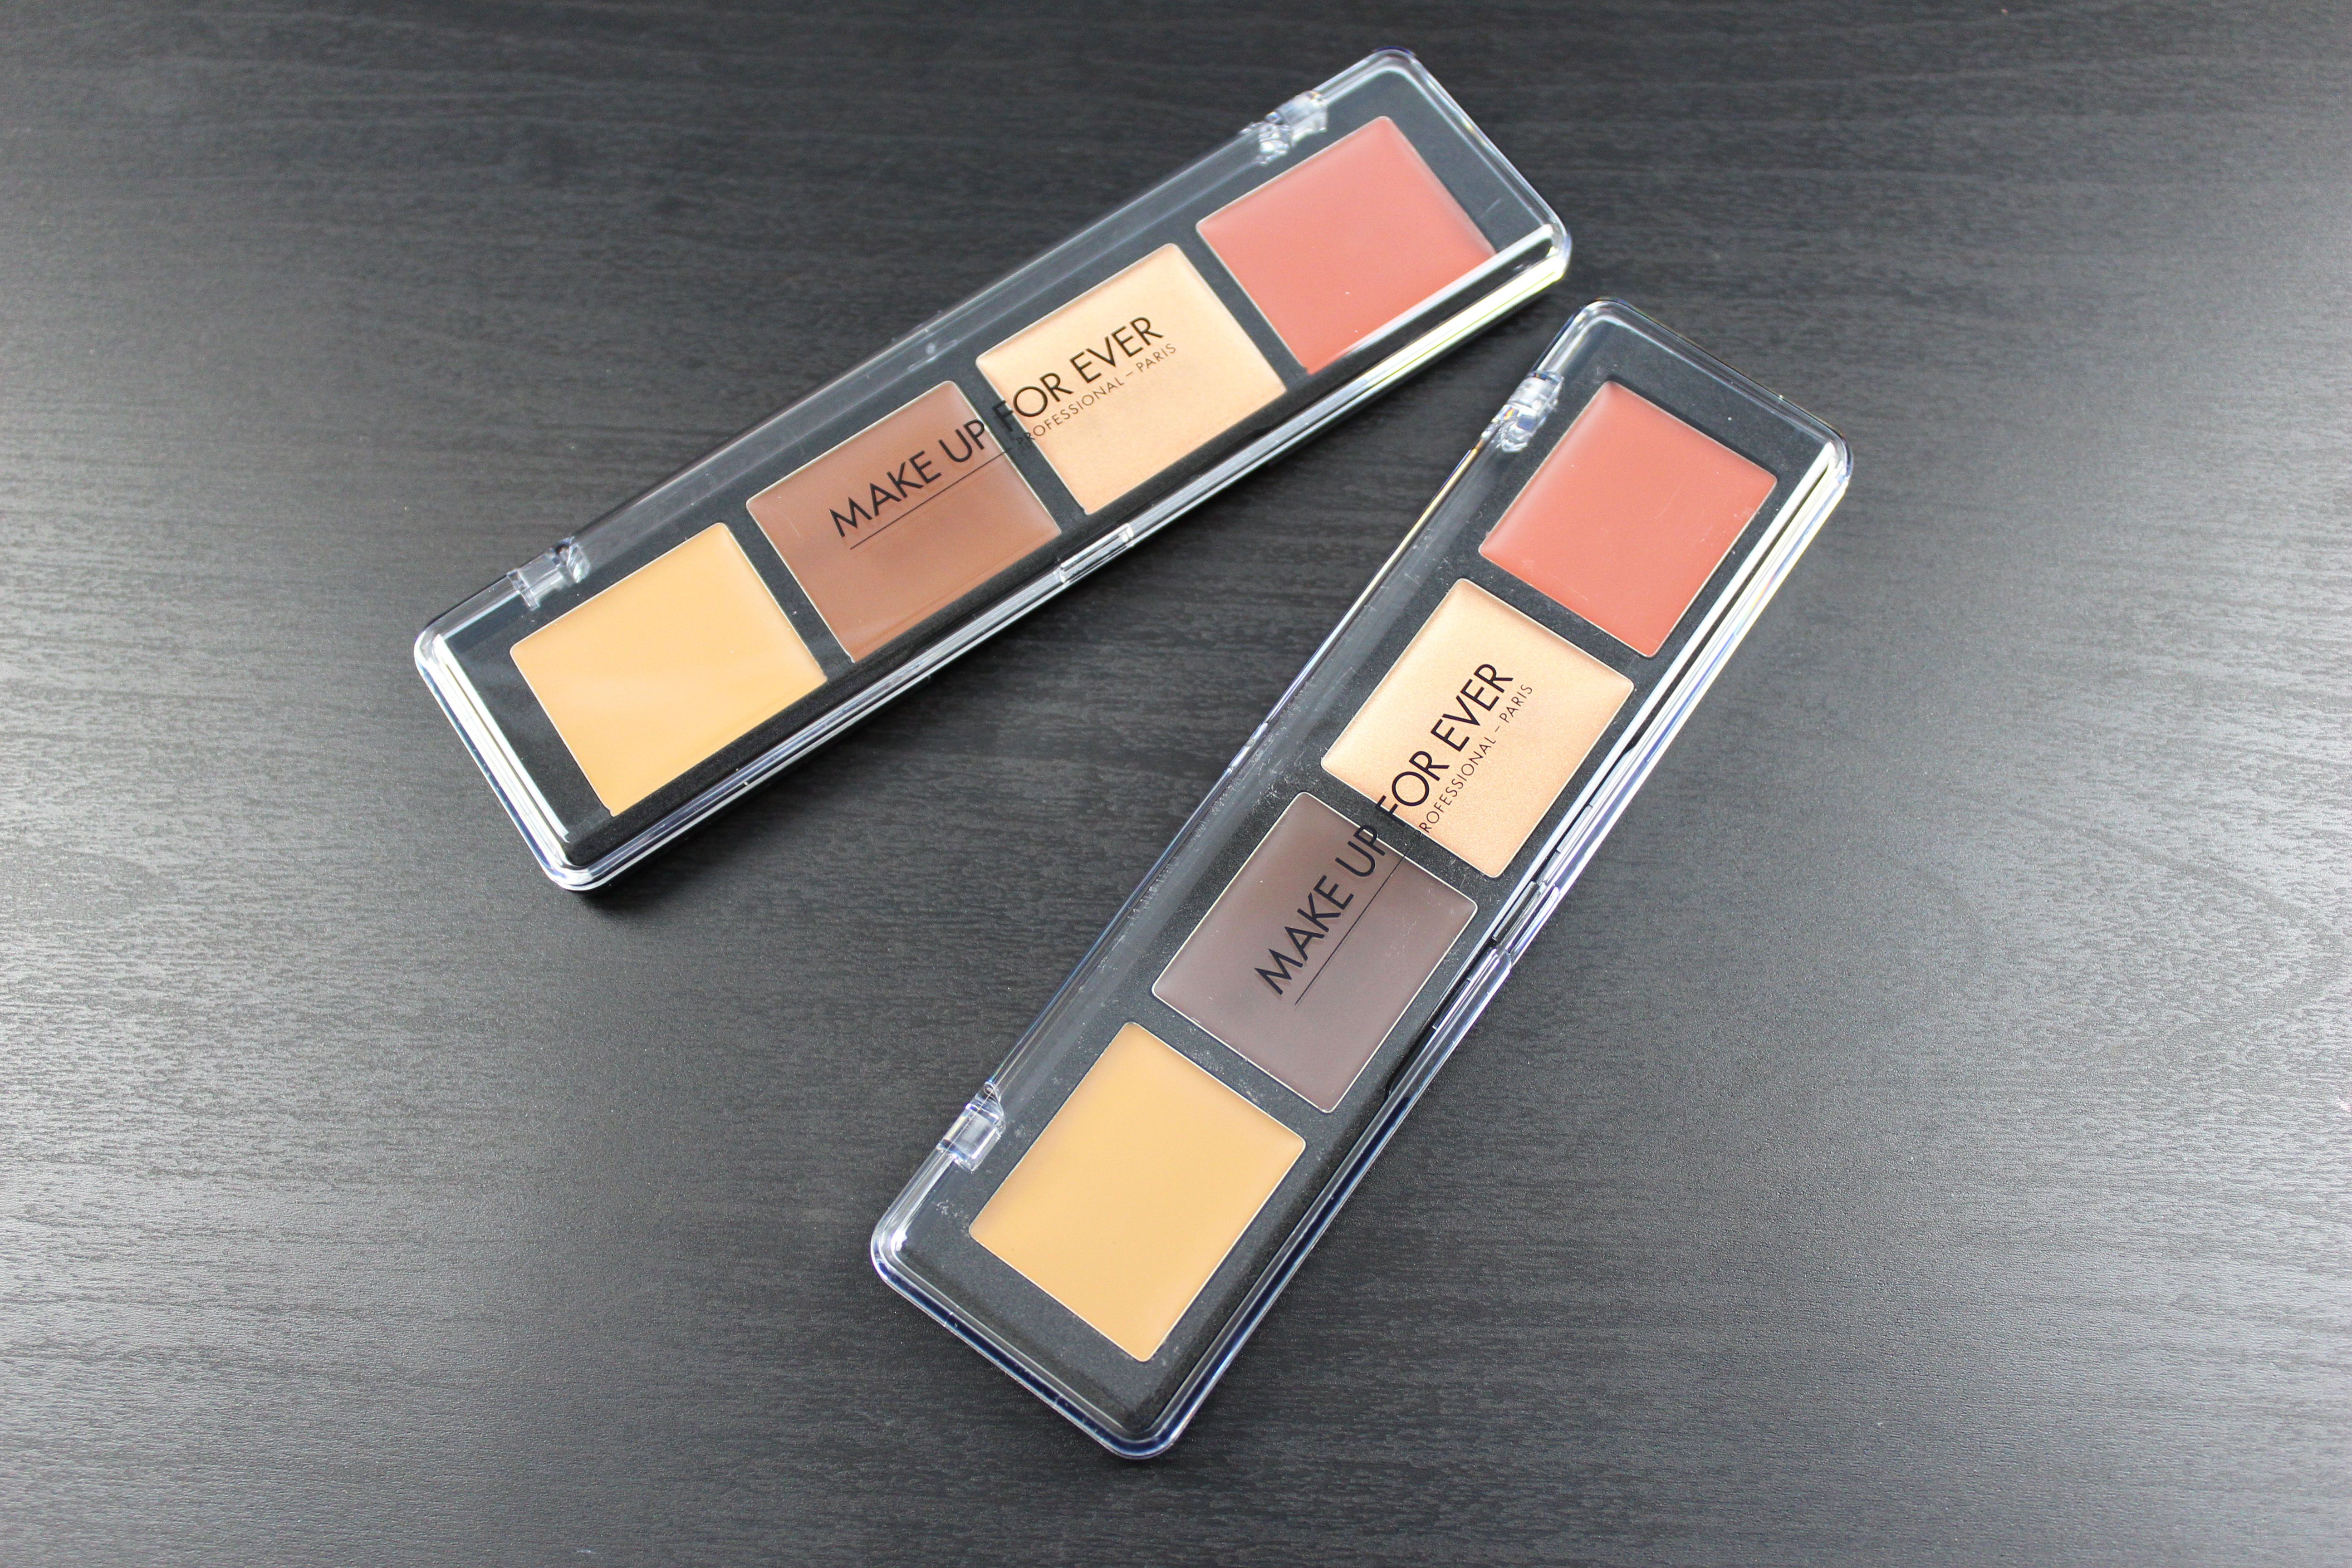 Make Up For Ever Pro Sculpting Palettes (#20 and #30